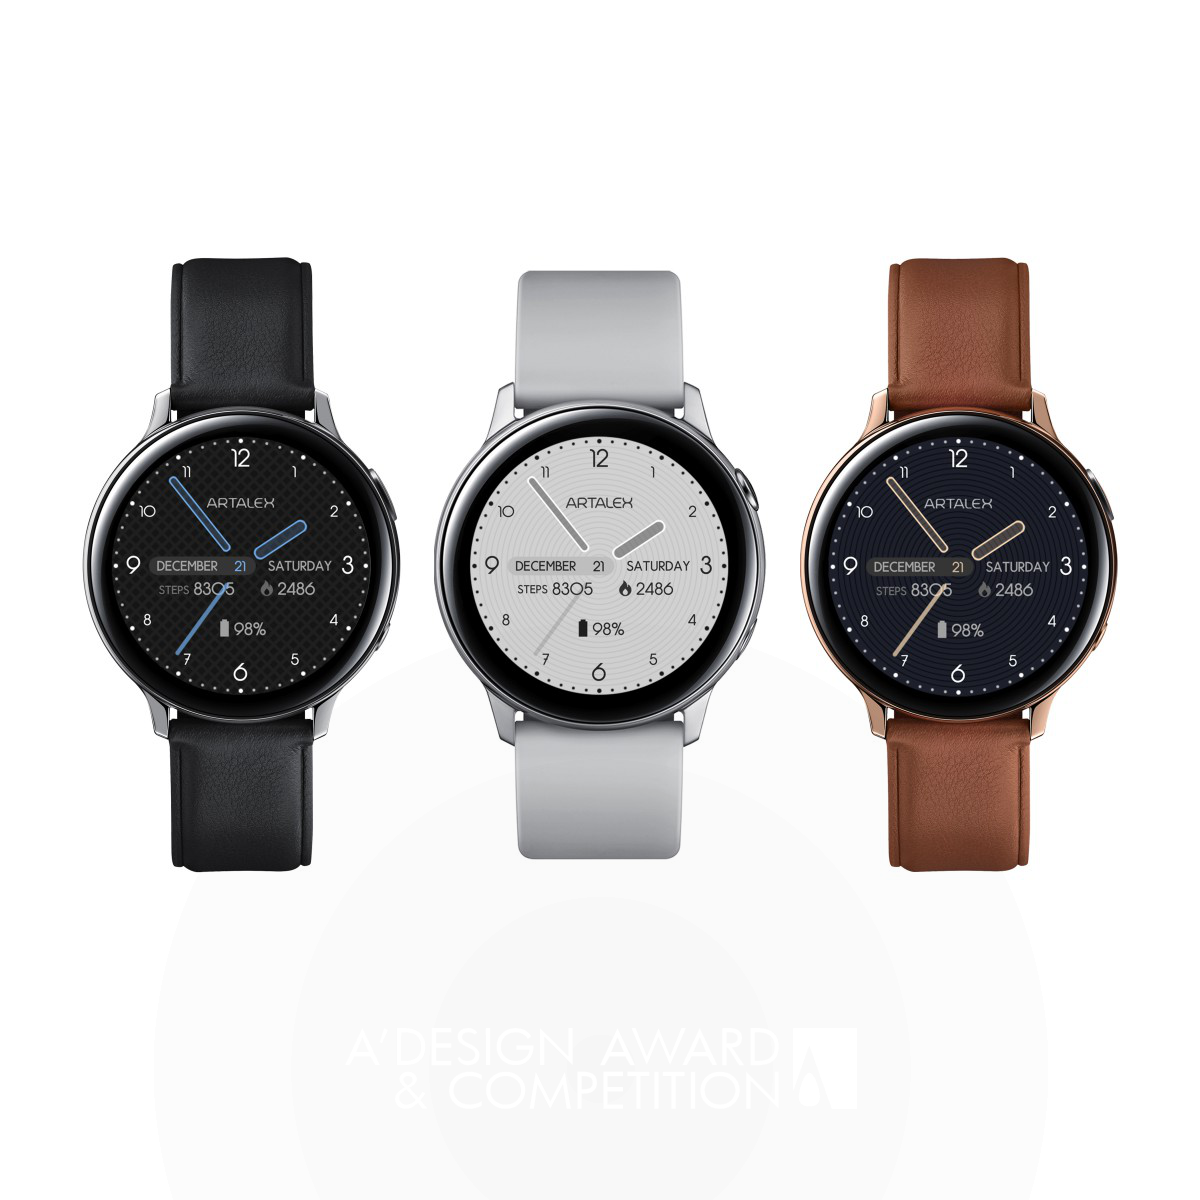 Simple Code II Saphire Smartwatch Face by Alex Pan Yong Bronze Interface, Interaction and User Experience Design Award Winner 2020 